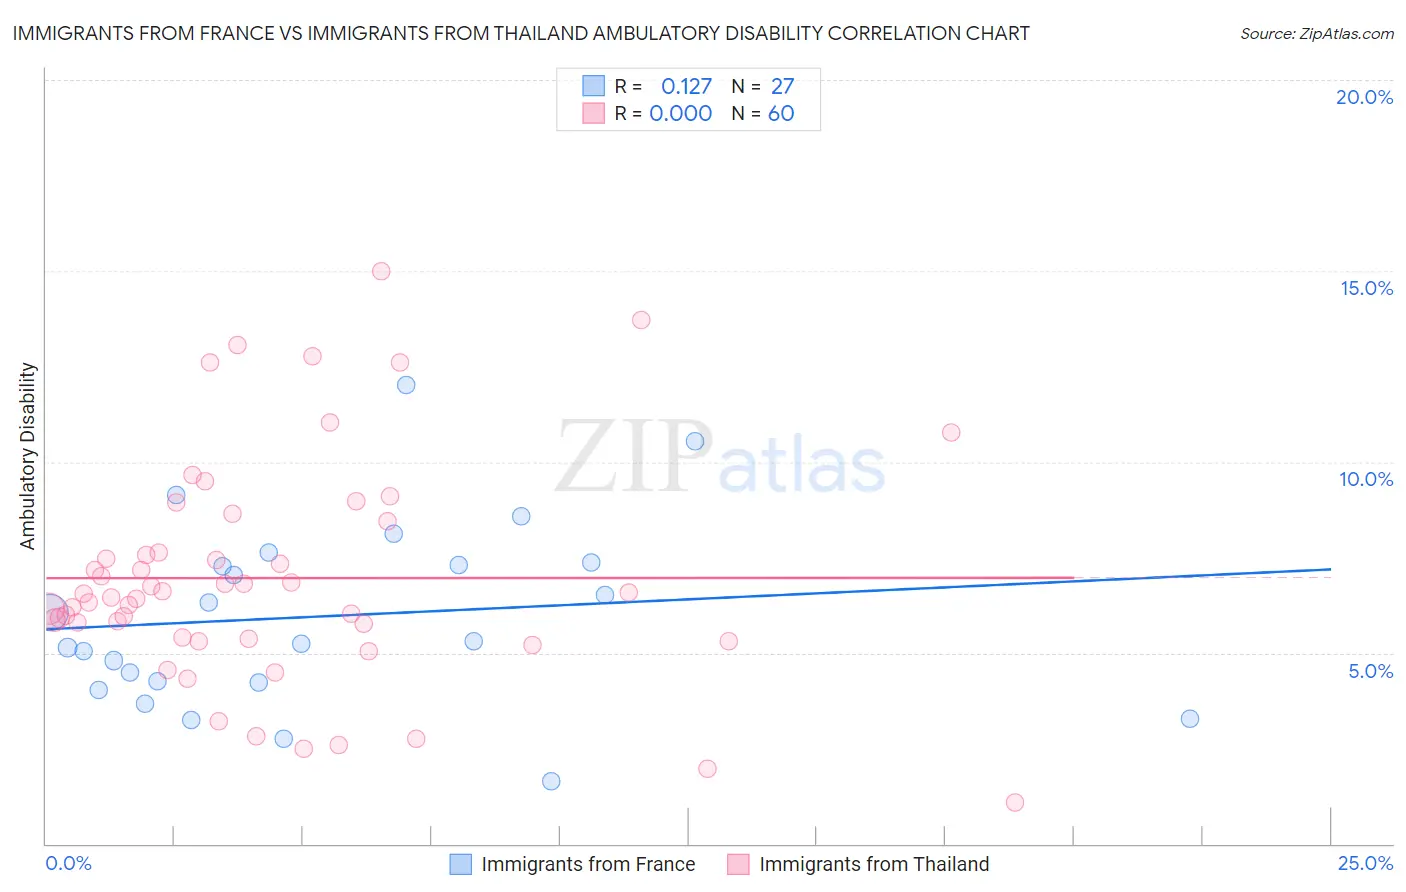 Immigrants from France vs Immigrants from Thailand Ambulatory Disability